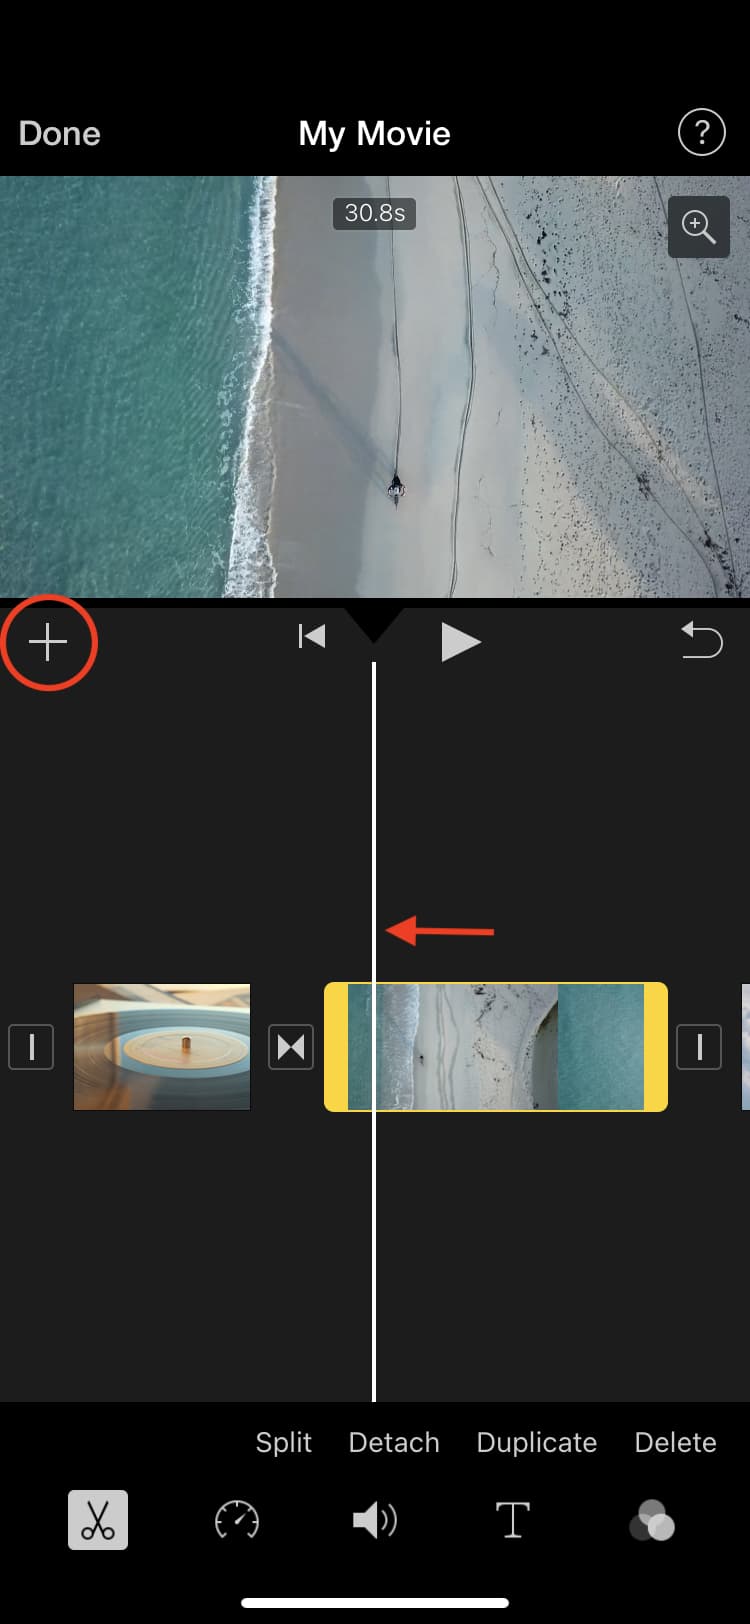 Add image or video for Picture in Picture in iPhone iMovie